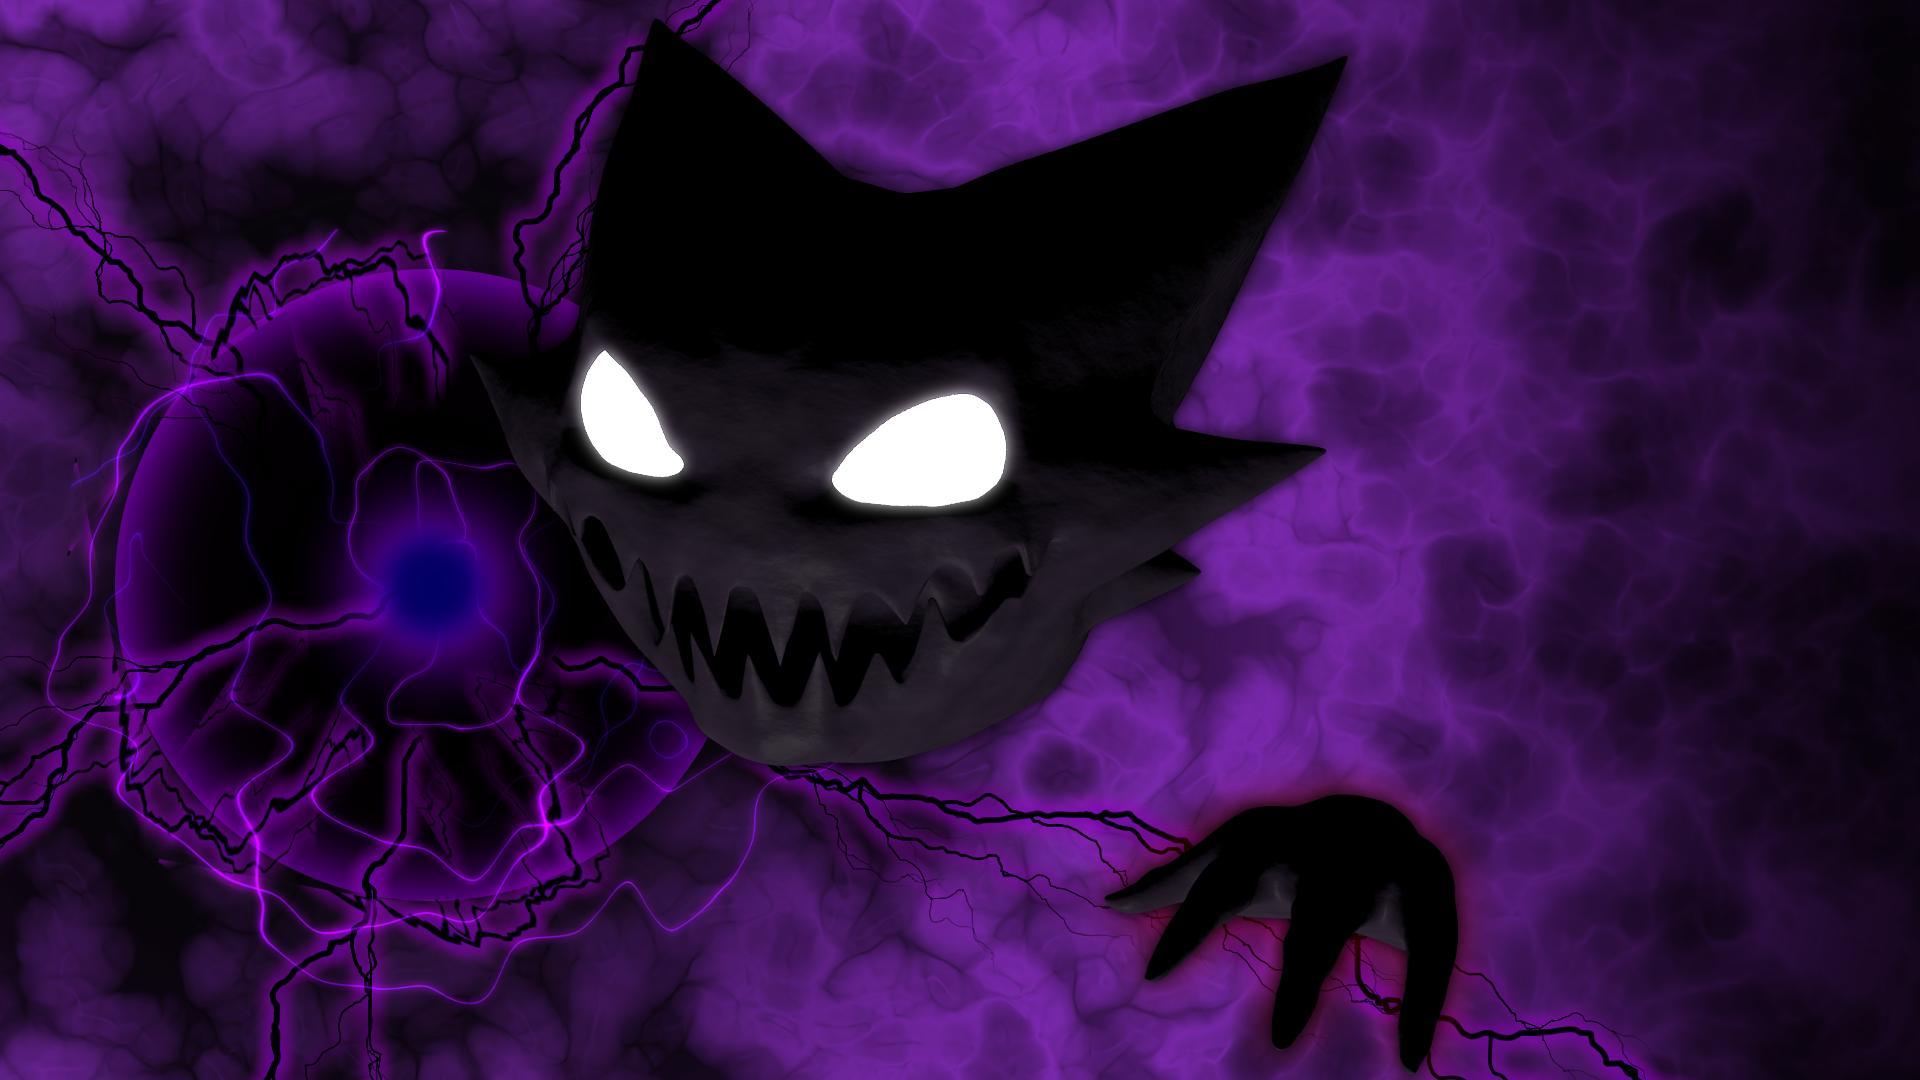 So my awesome friend made me this wallpaper for my birthday A Haunter  creeping up onto the desktop  rpokemon